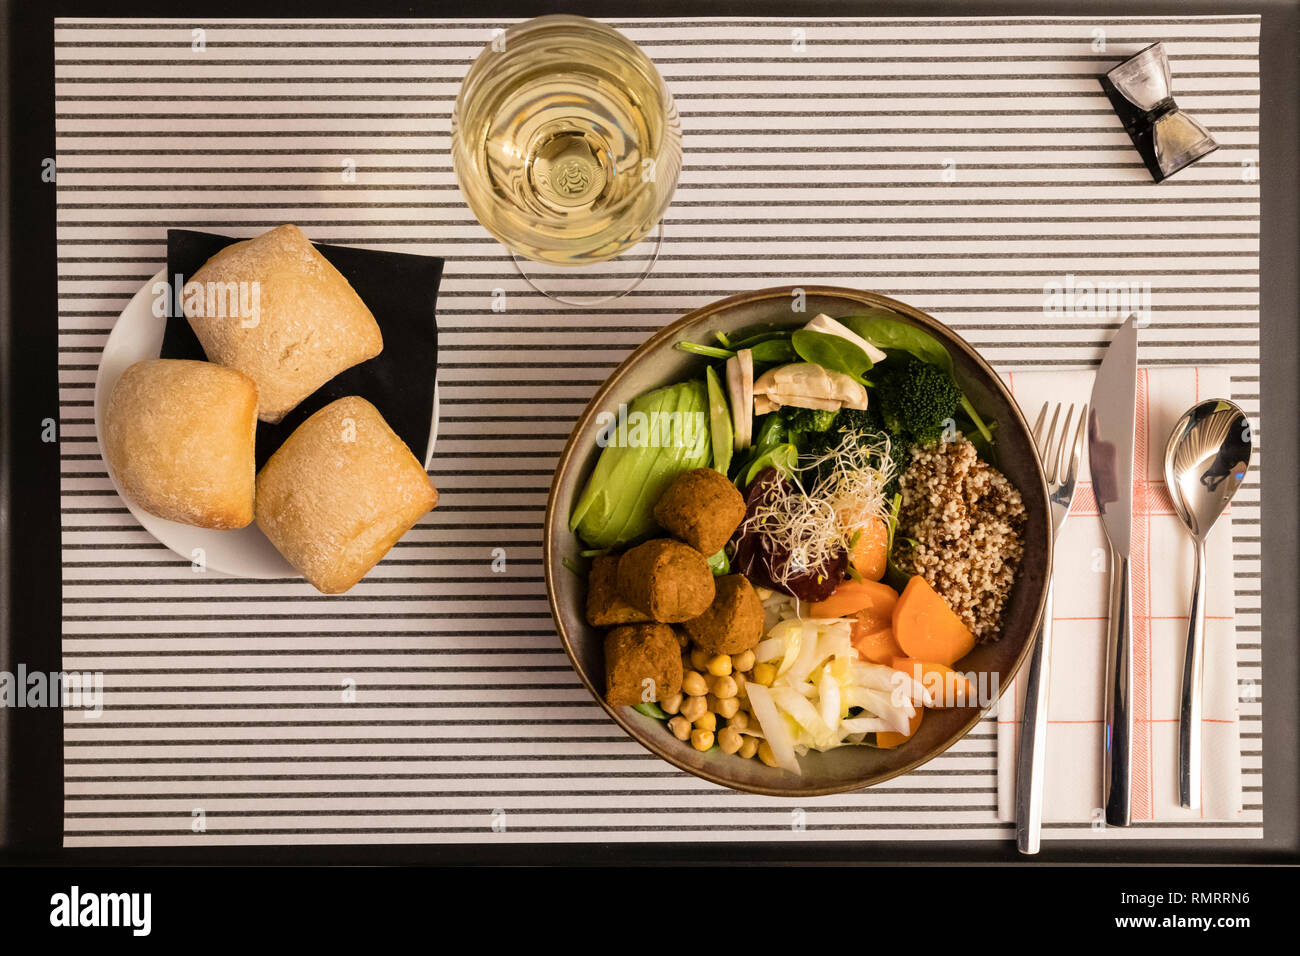 Hotel Room service: vegan meal and white wine. Stock Photo